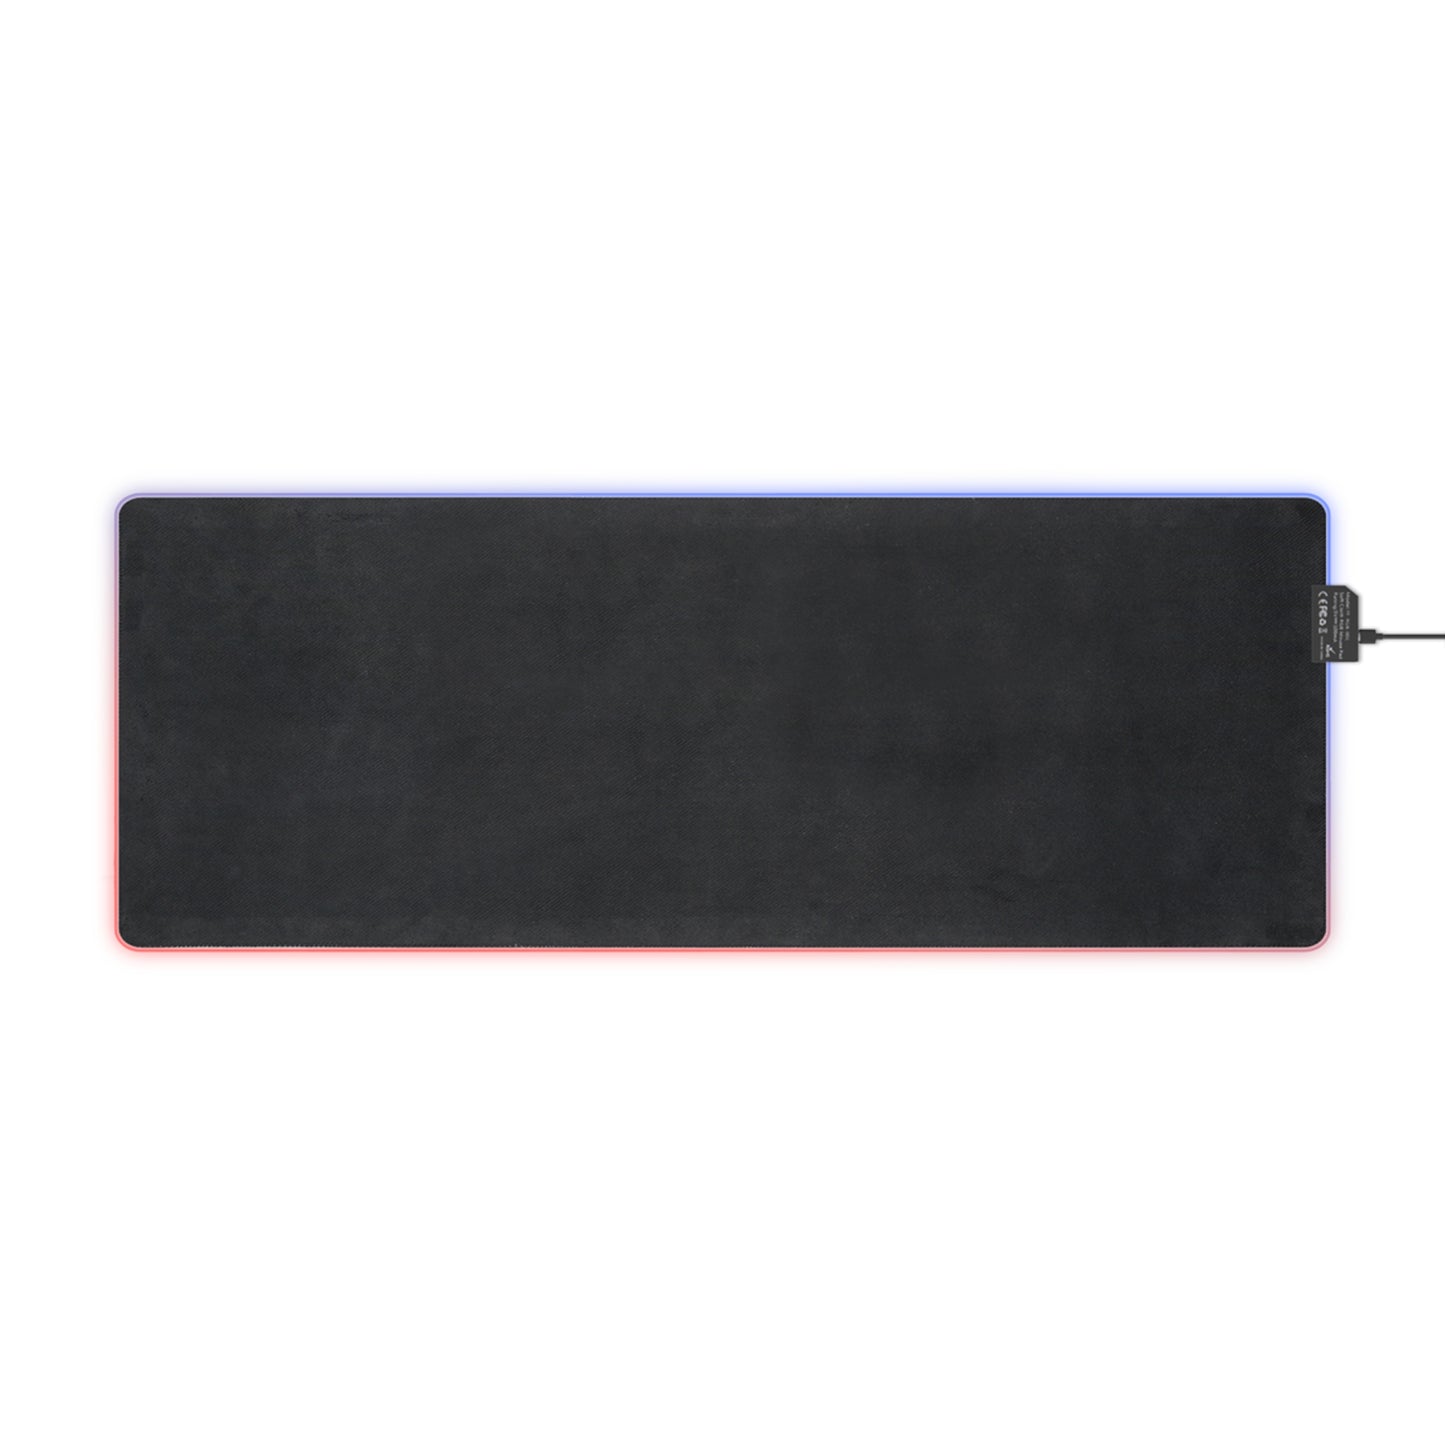 COD 001 -  LED Gaming Mouse Pad